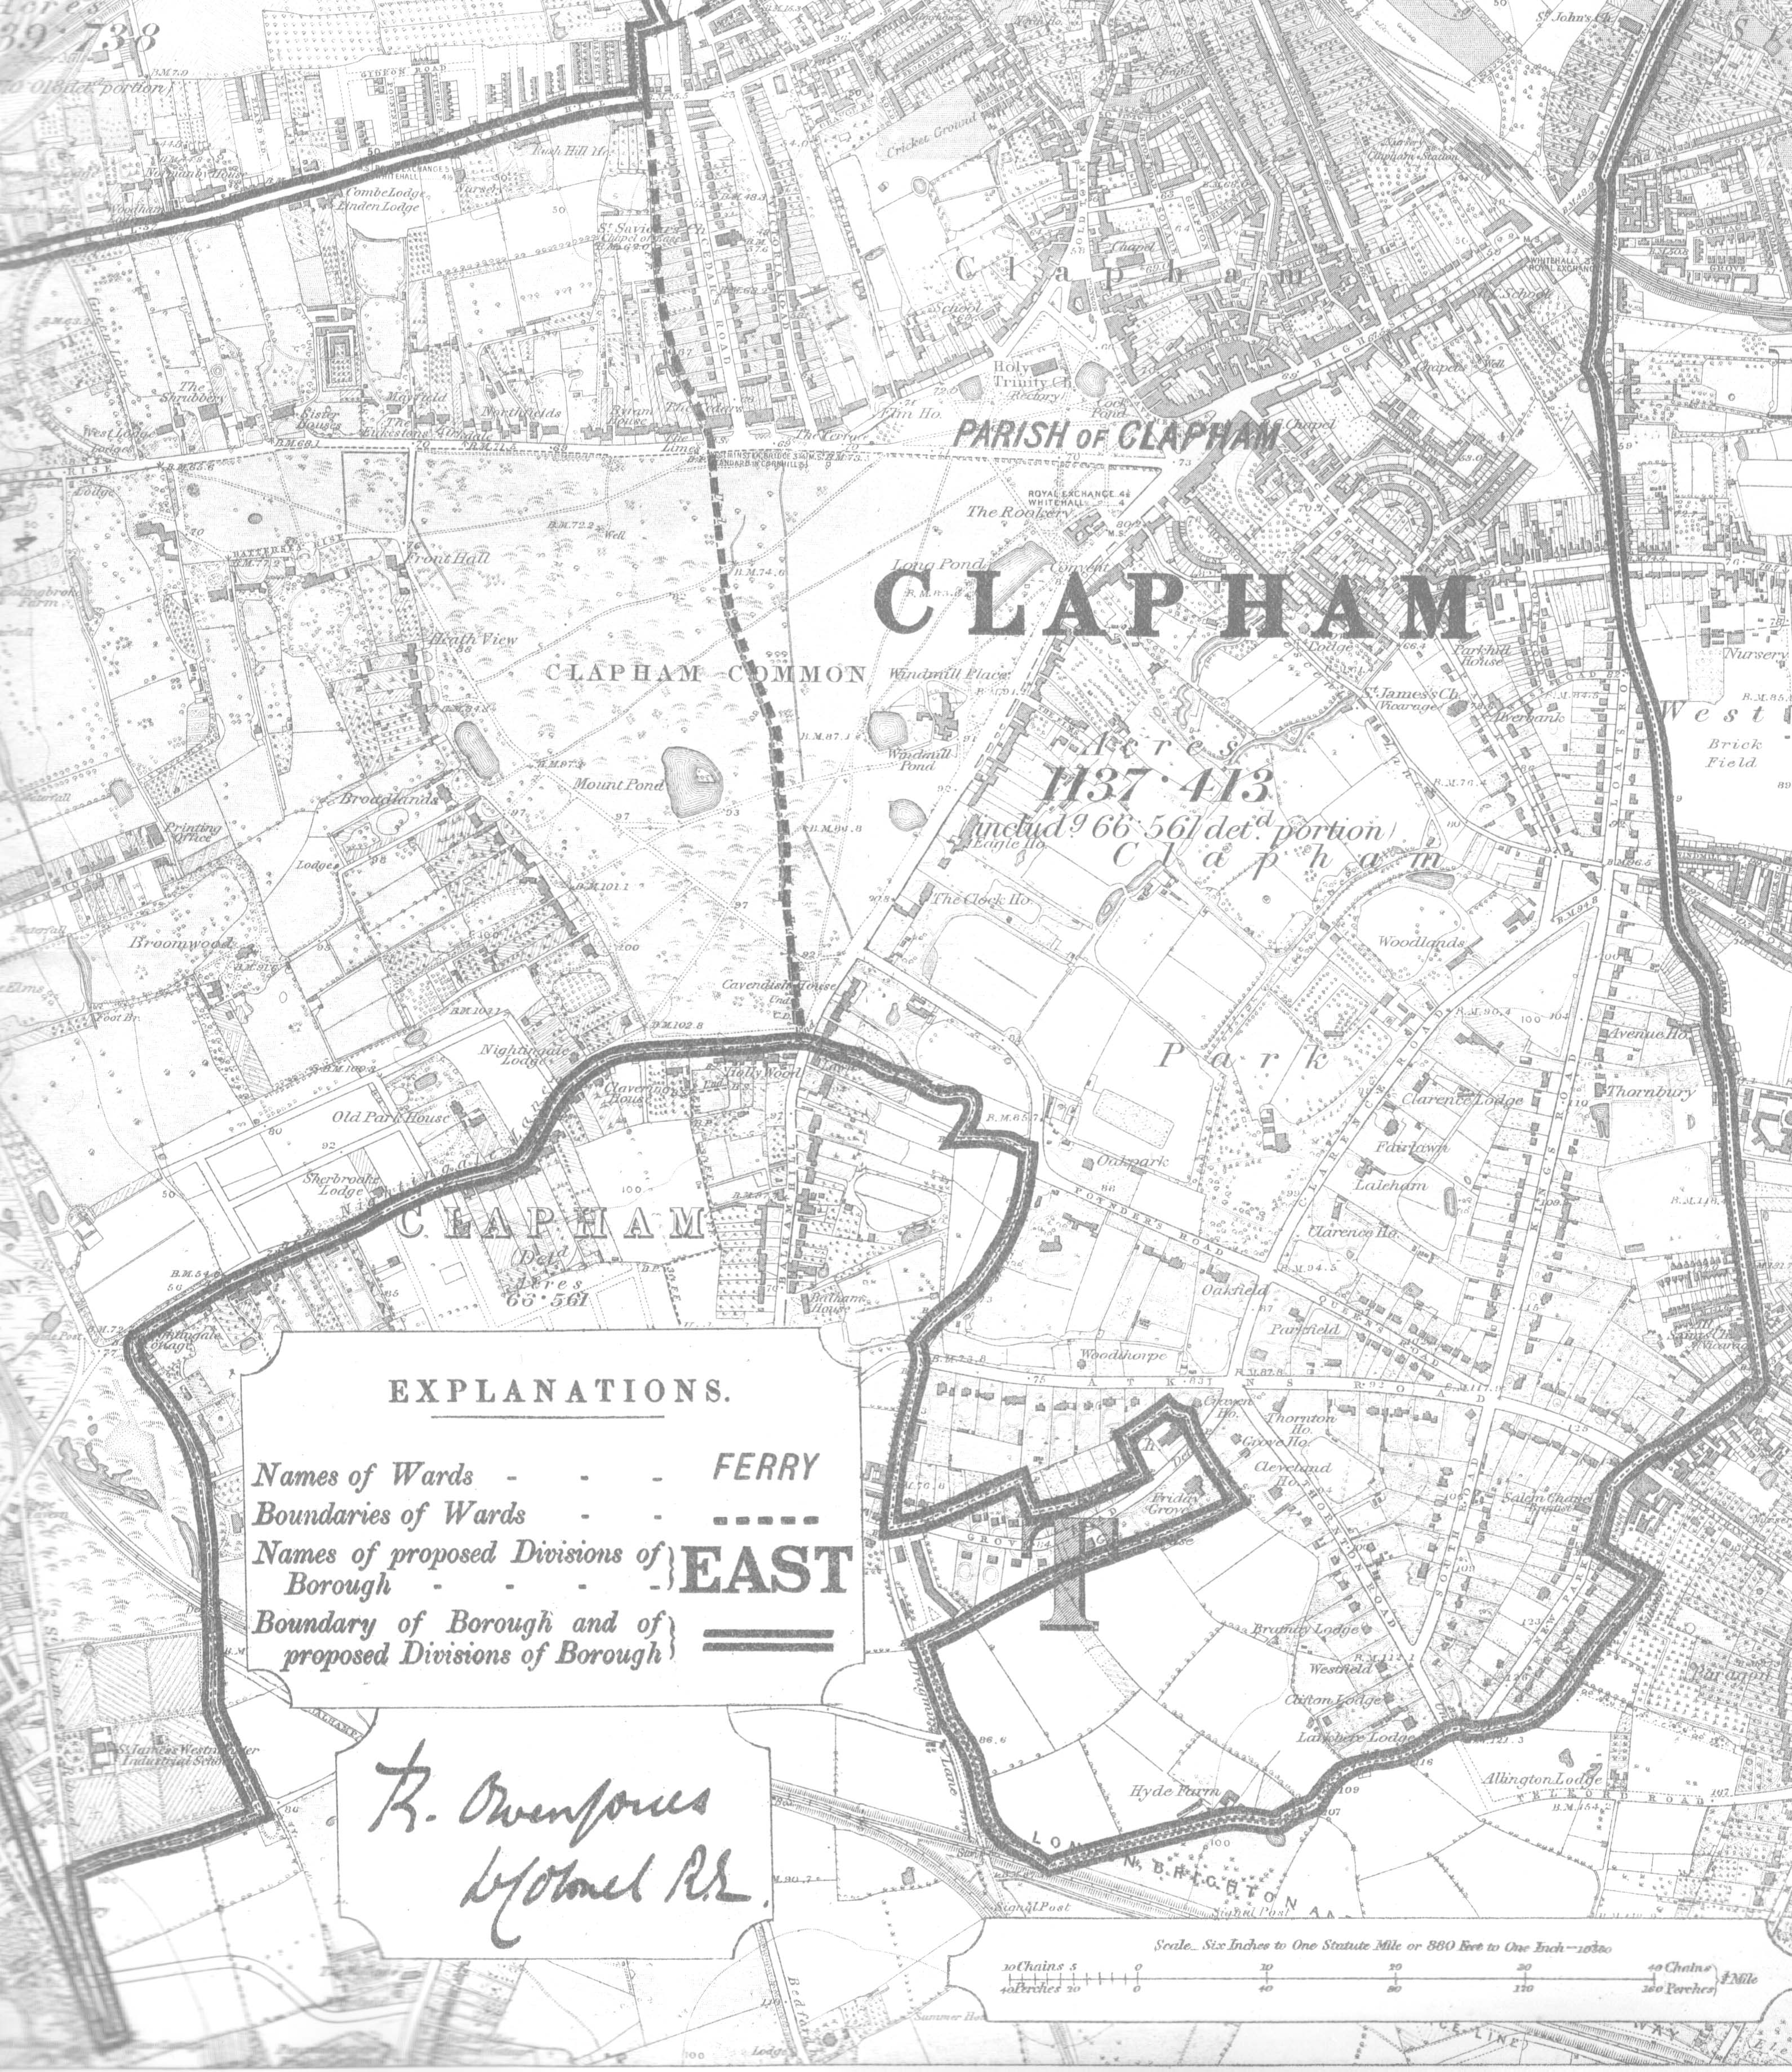 Map of the Borough of Battersea & Clapham, southern section